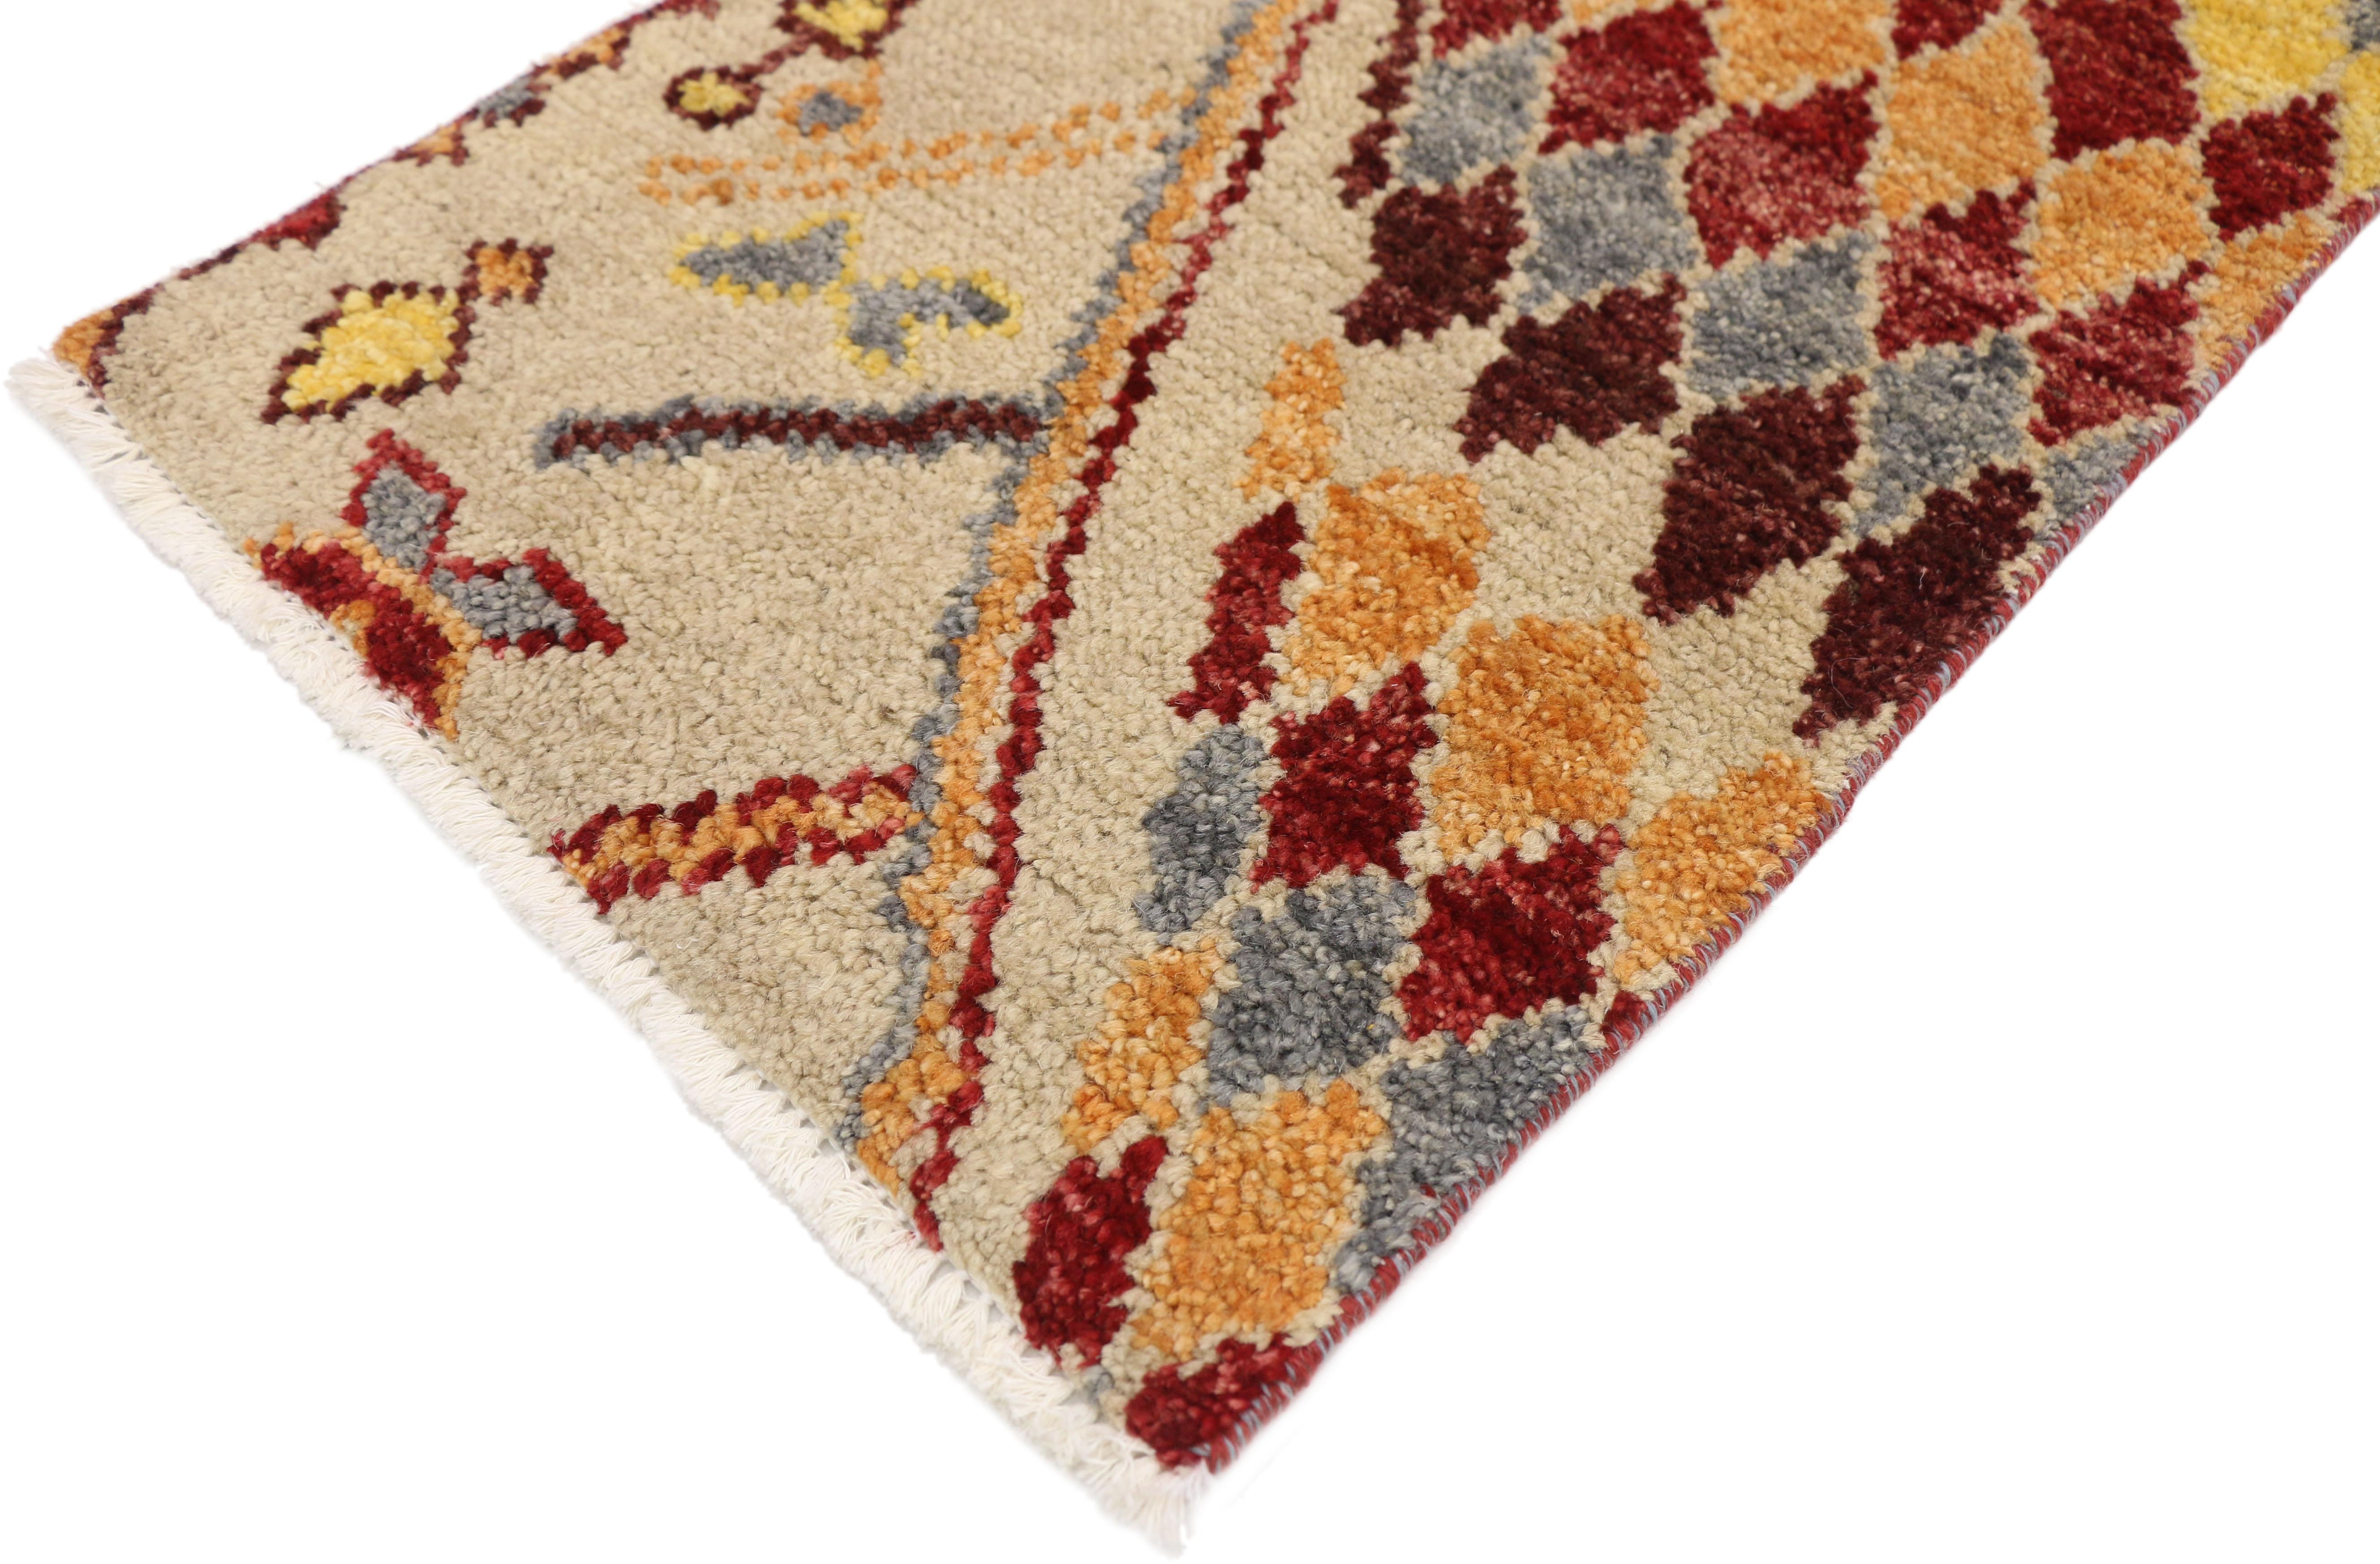 80456 New Contemporary Moroccan Wagireh Rug, 01'06 x 02'01. 
Contemporary Moroccan sampler wagireh rugs from Pakistan represent a modern interpretation of the traditional technique, weaving intricate small designs into larger rugs. These